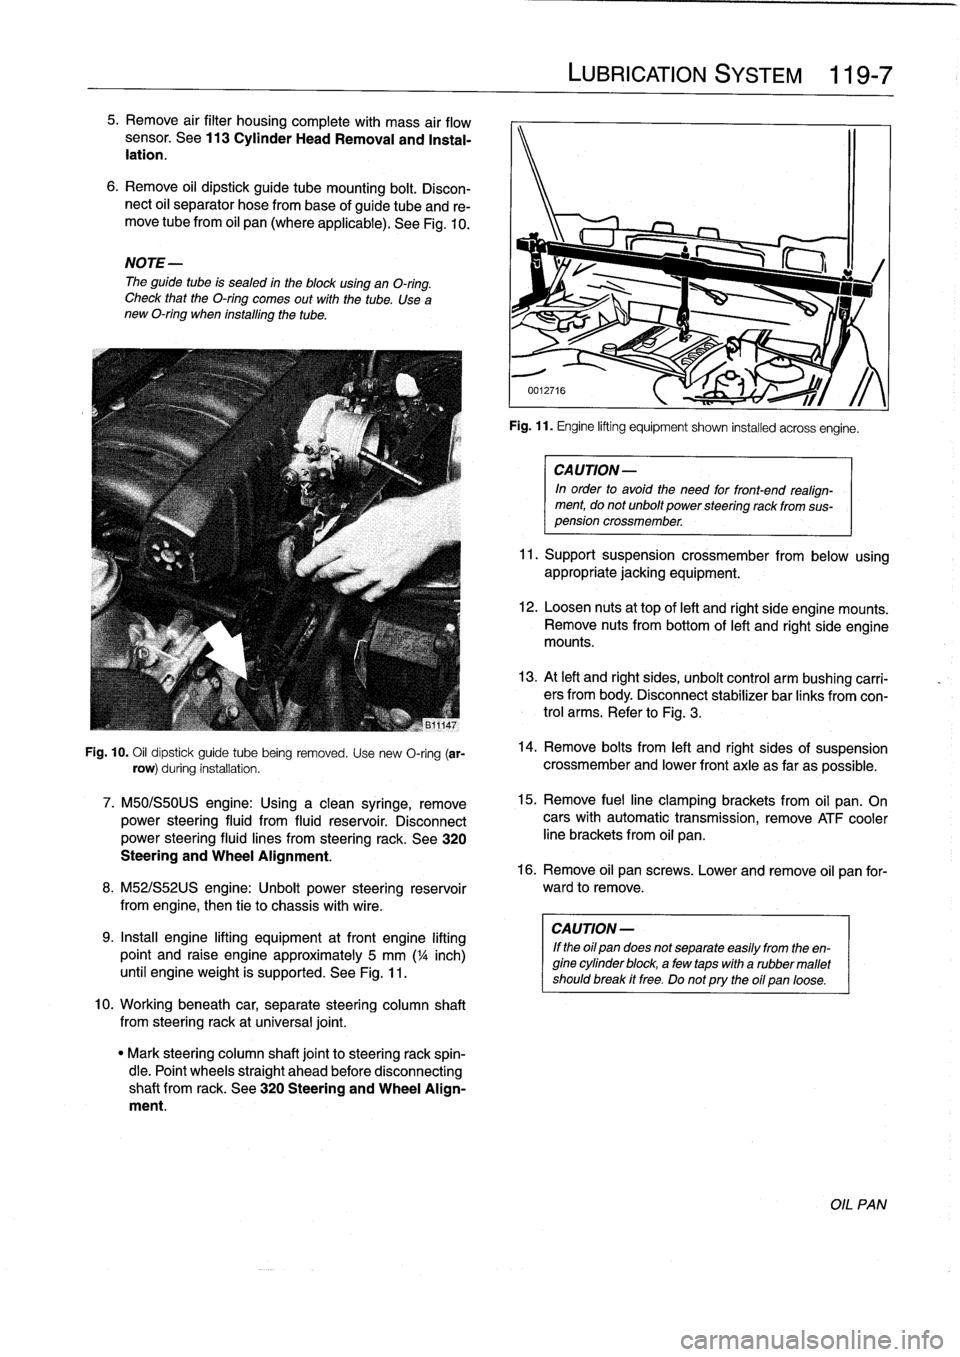 BMW 325i 1998 E36 Workshop Manual 
5
.
Remove
air
filter
housingcomplete
with
mass
air
flow
sensor
.
See113
Cylinder
HeadRemoval
and
Instal-
lation
.

6
.
Remove
oil
dipstick
guide
tube
mounting
bolt
.
Discon-
nect
oil
separator
hose
